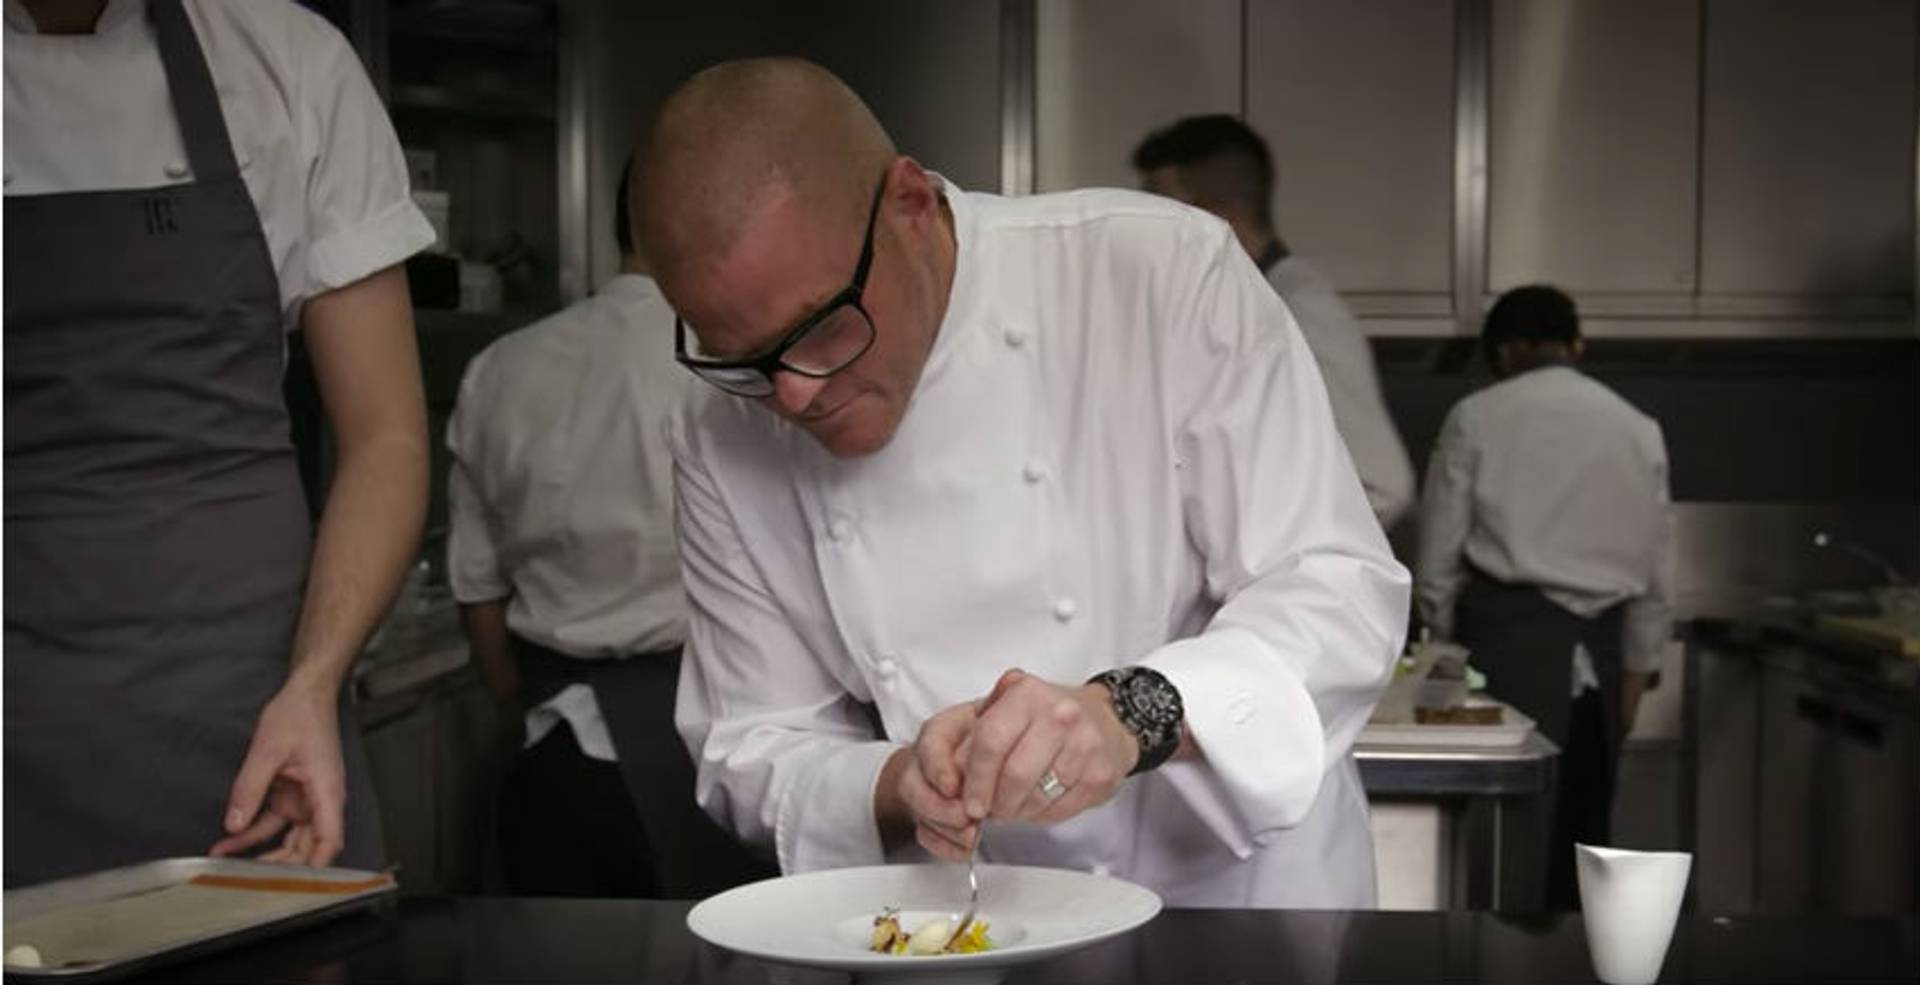 The Heston Bot teaches people how to cook